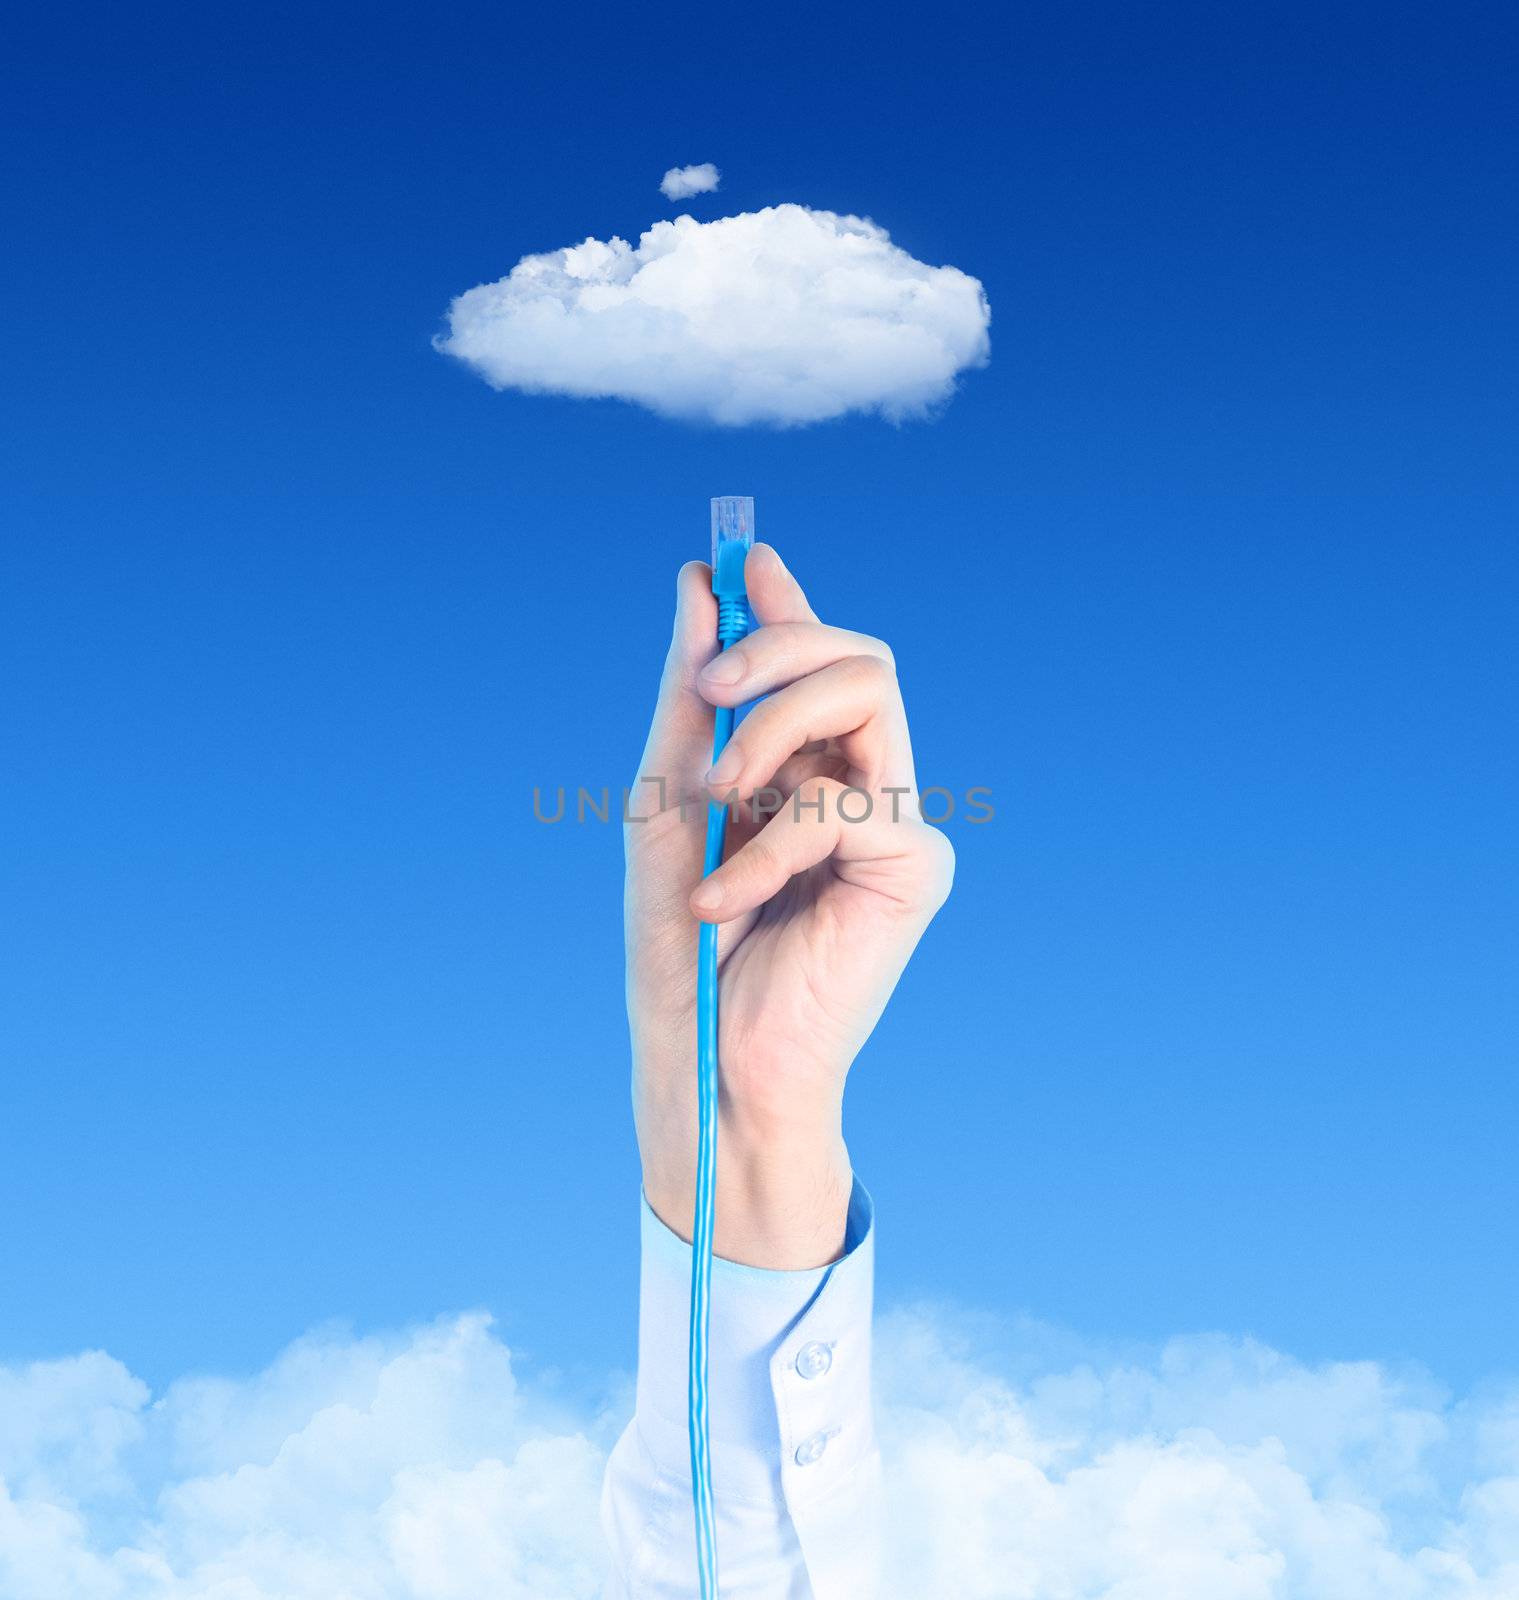 Hand with the cable connected to the cloud. Conceptual image on cloud computing theme.